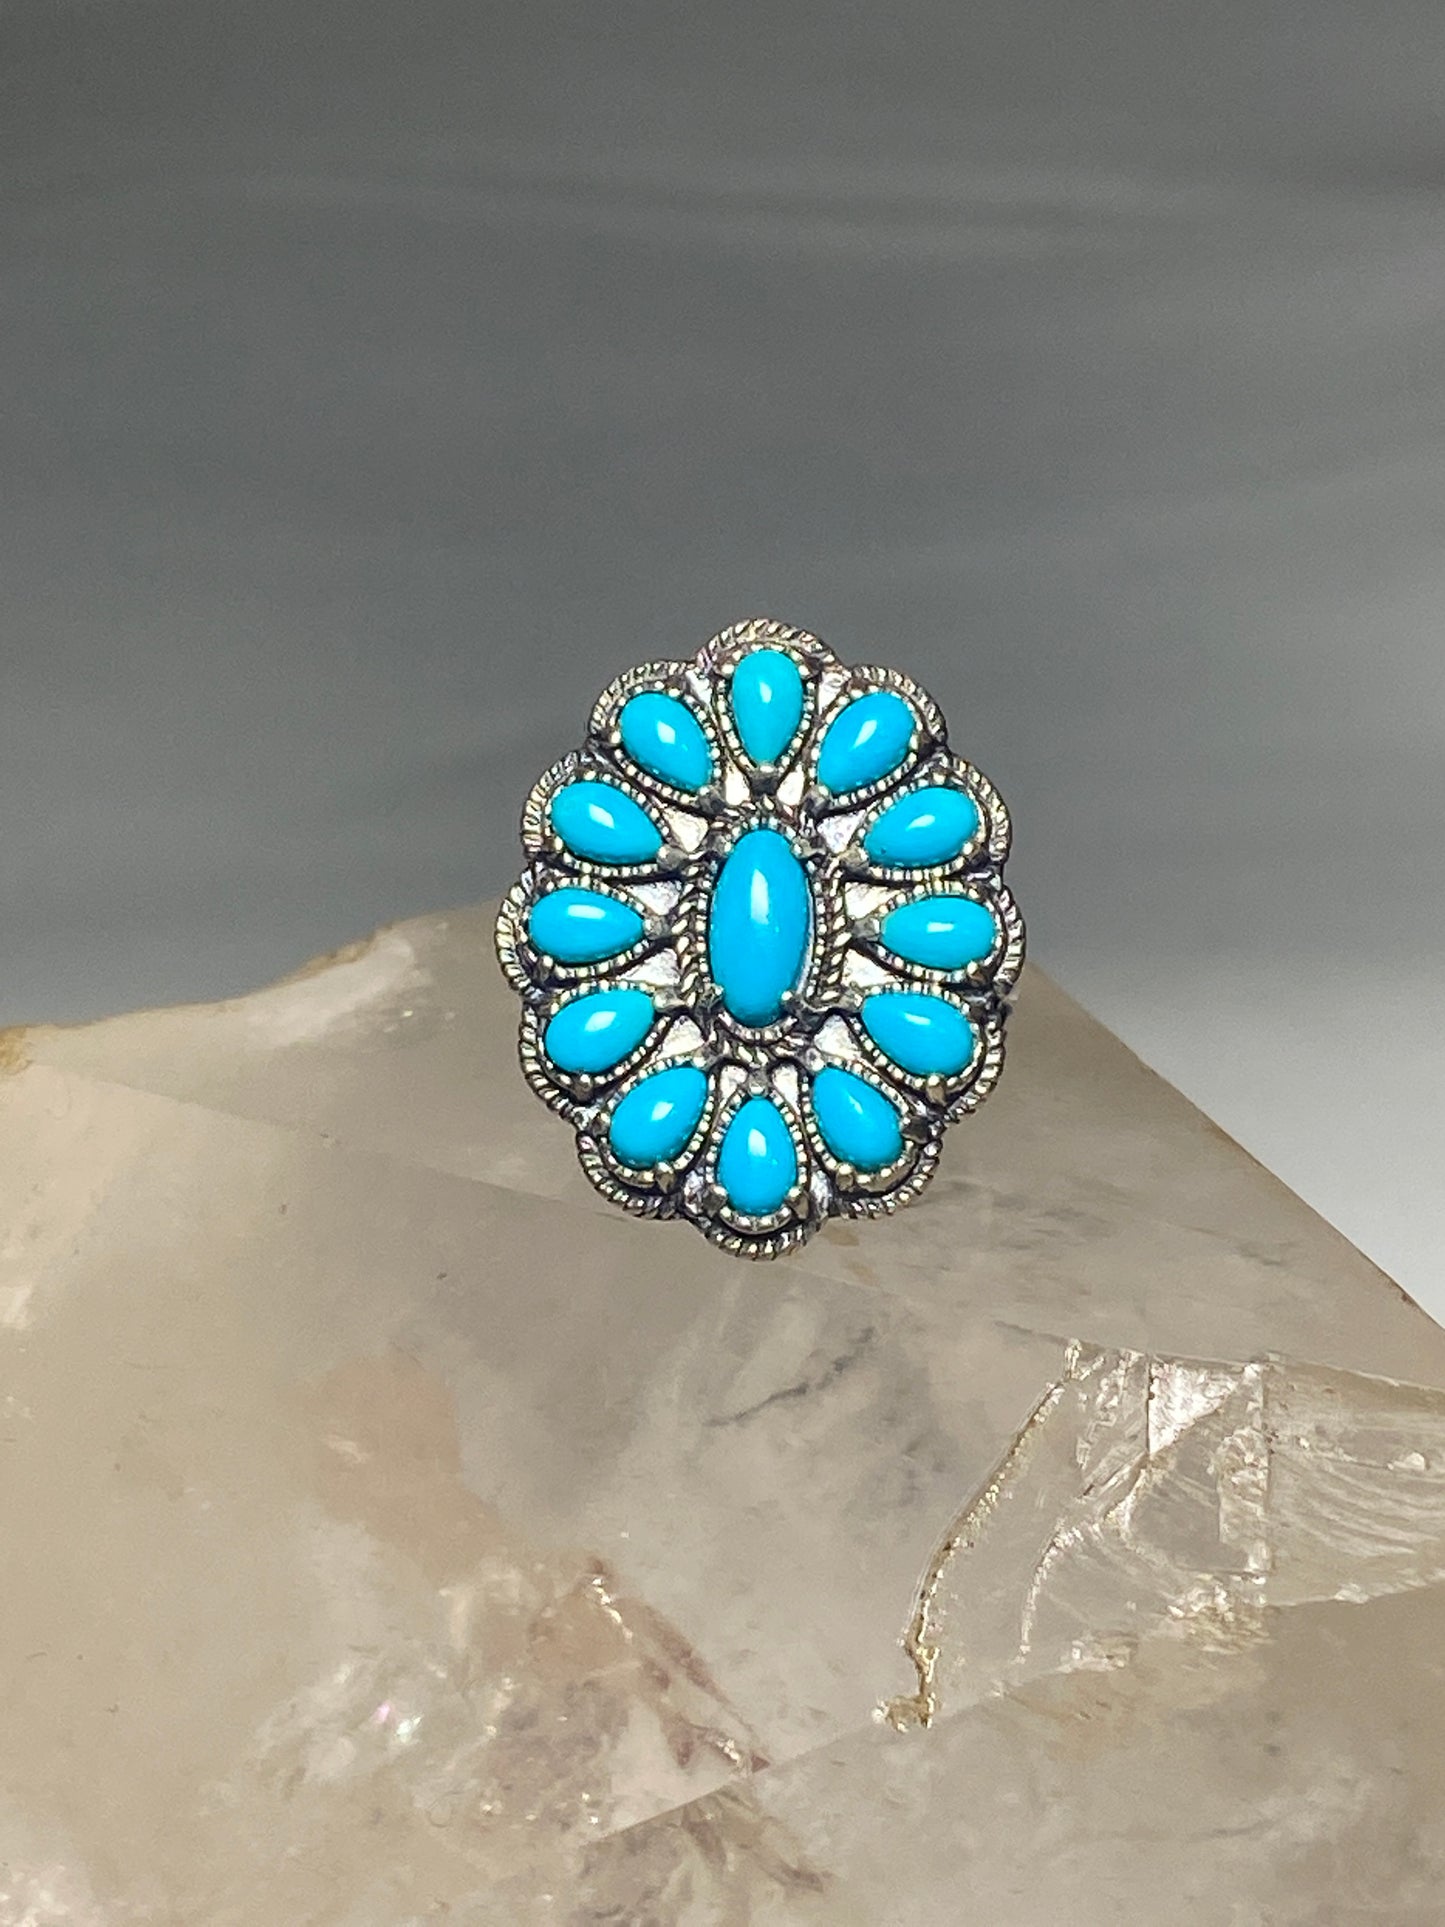 Turquoise ring size 7 Navajo Carolyn Pollack petite point sterling silver women girls